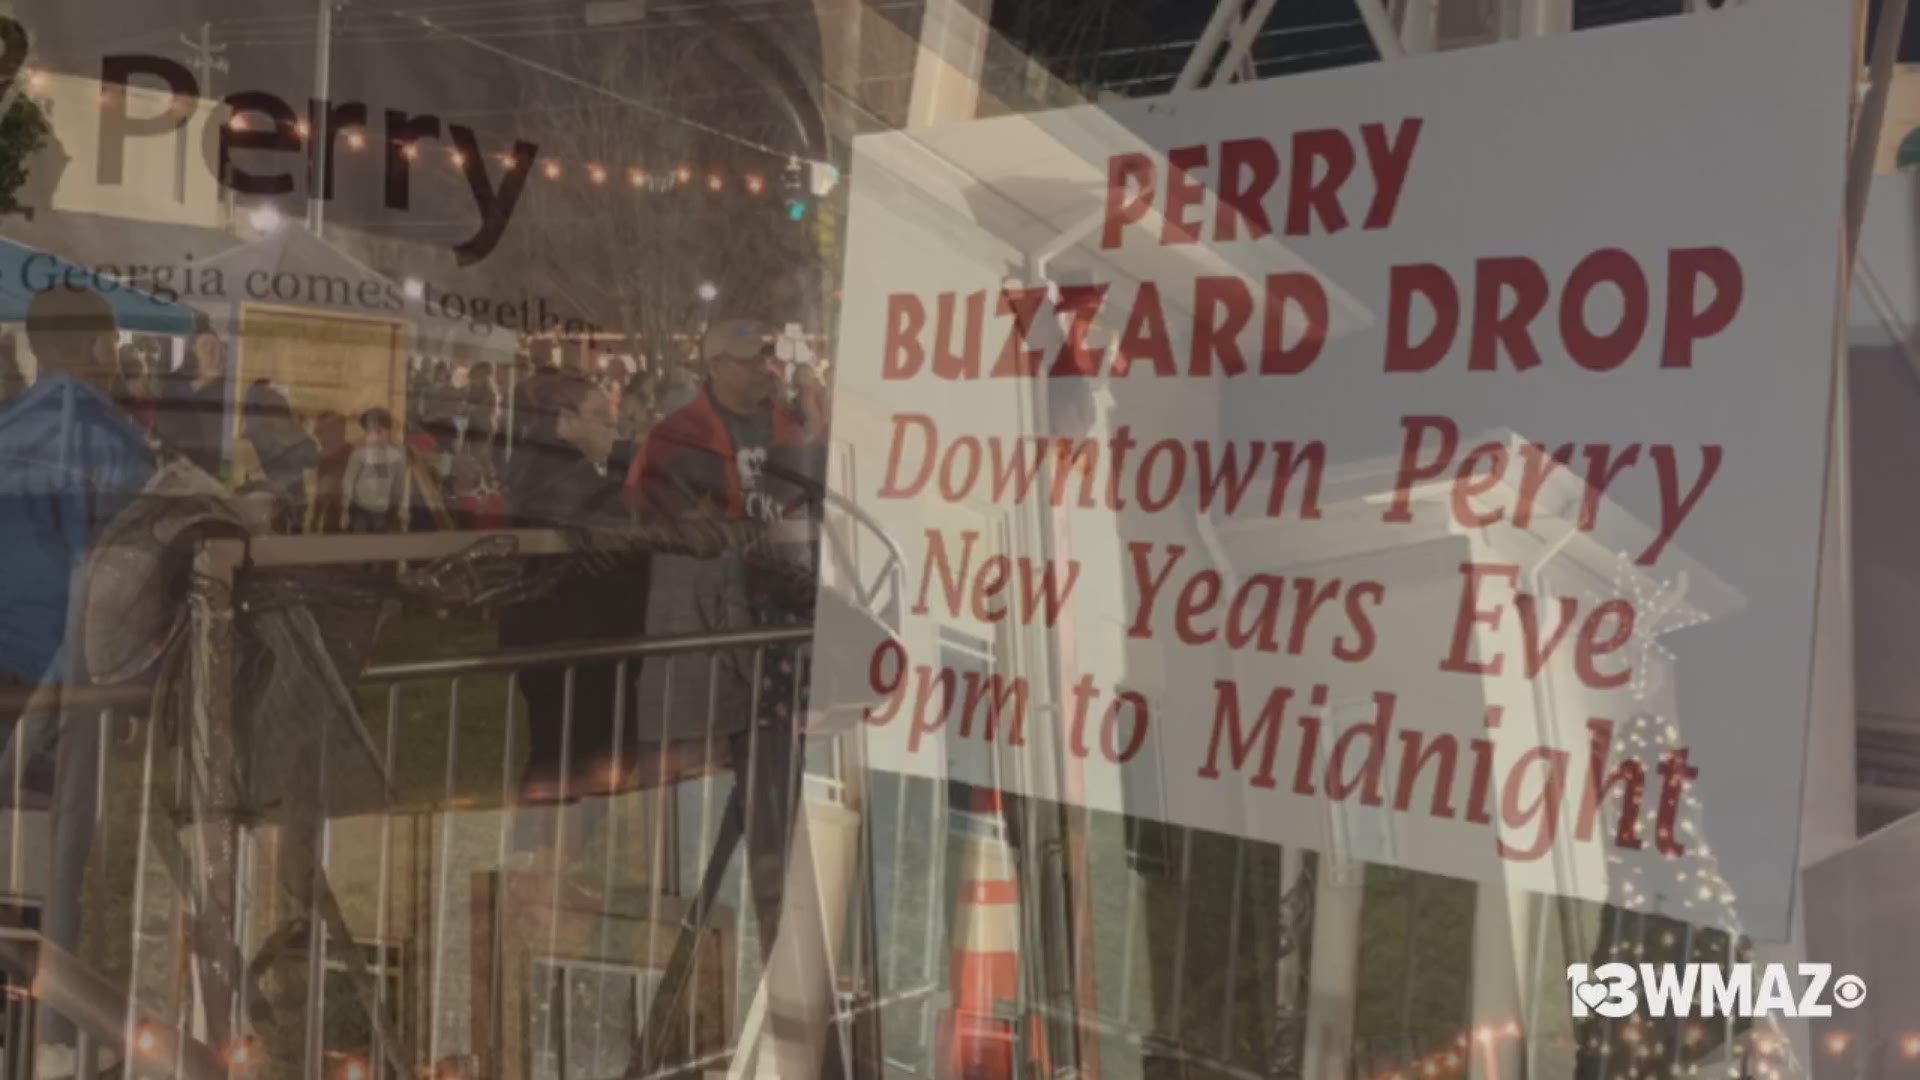 Perry's Buzzard Drop on New Year's Eve